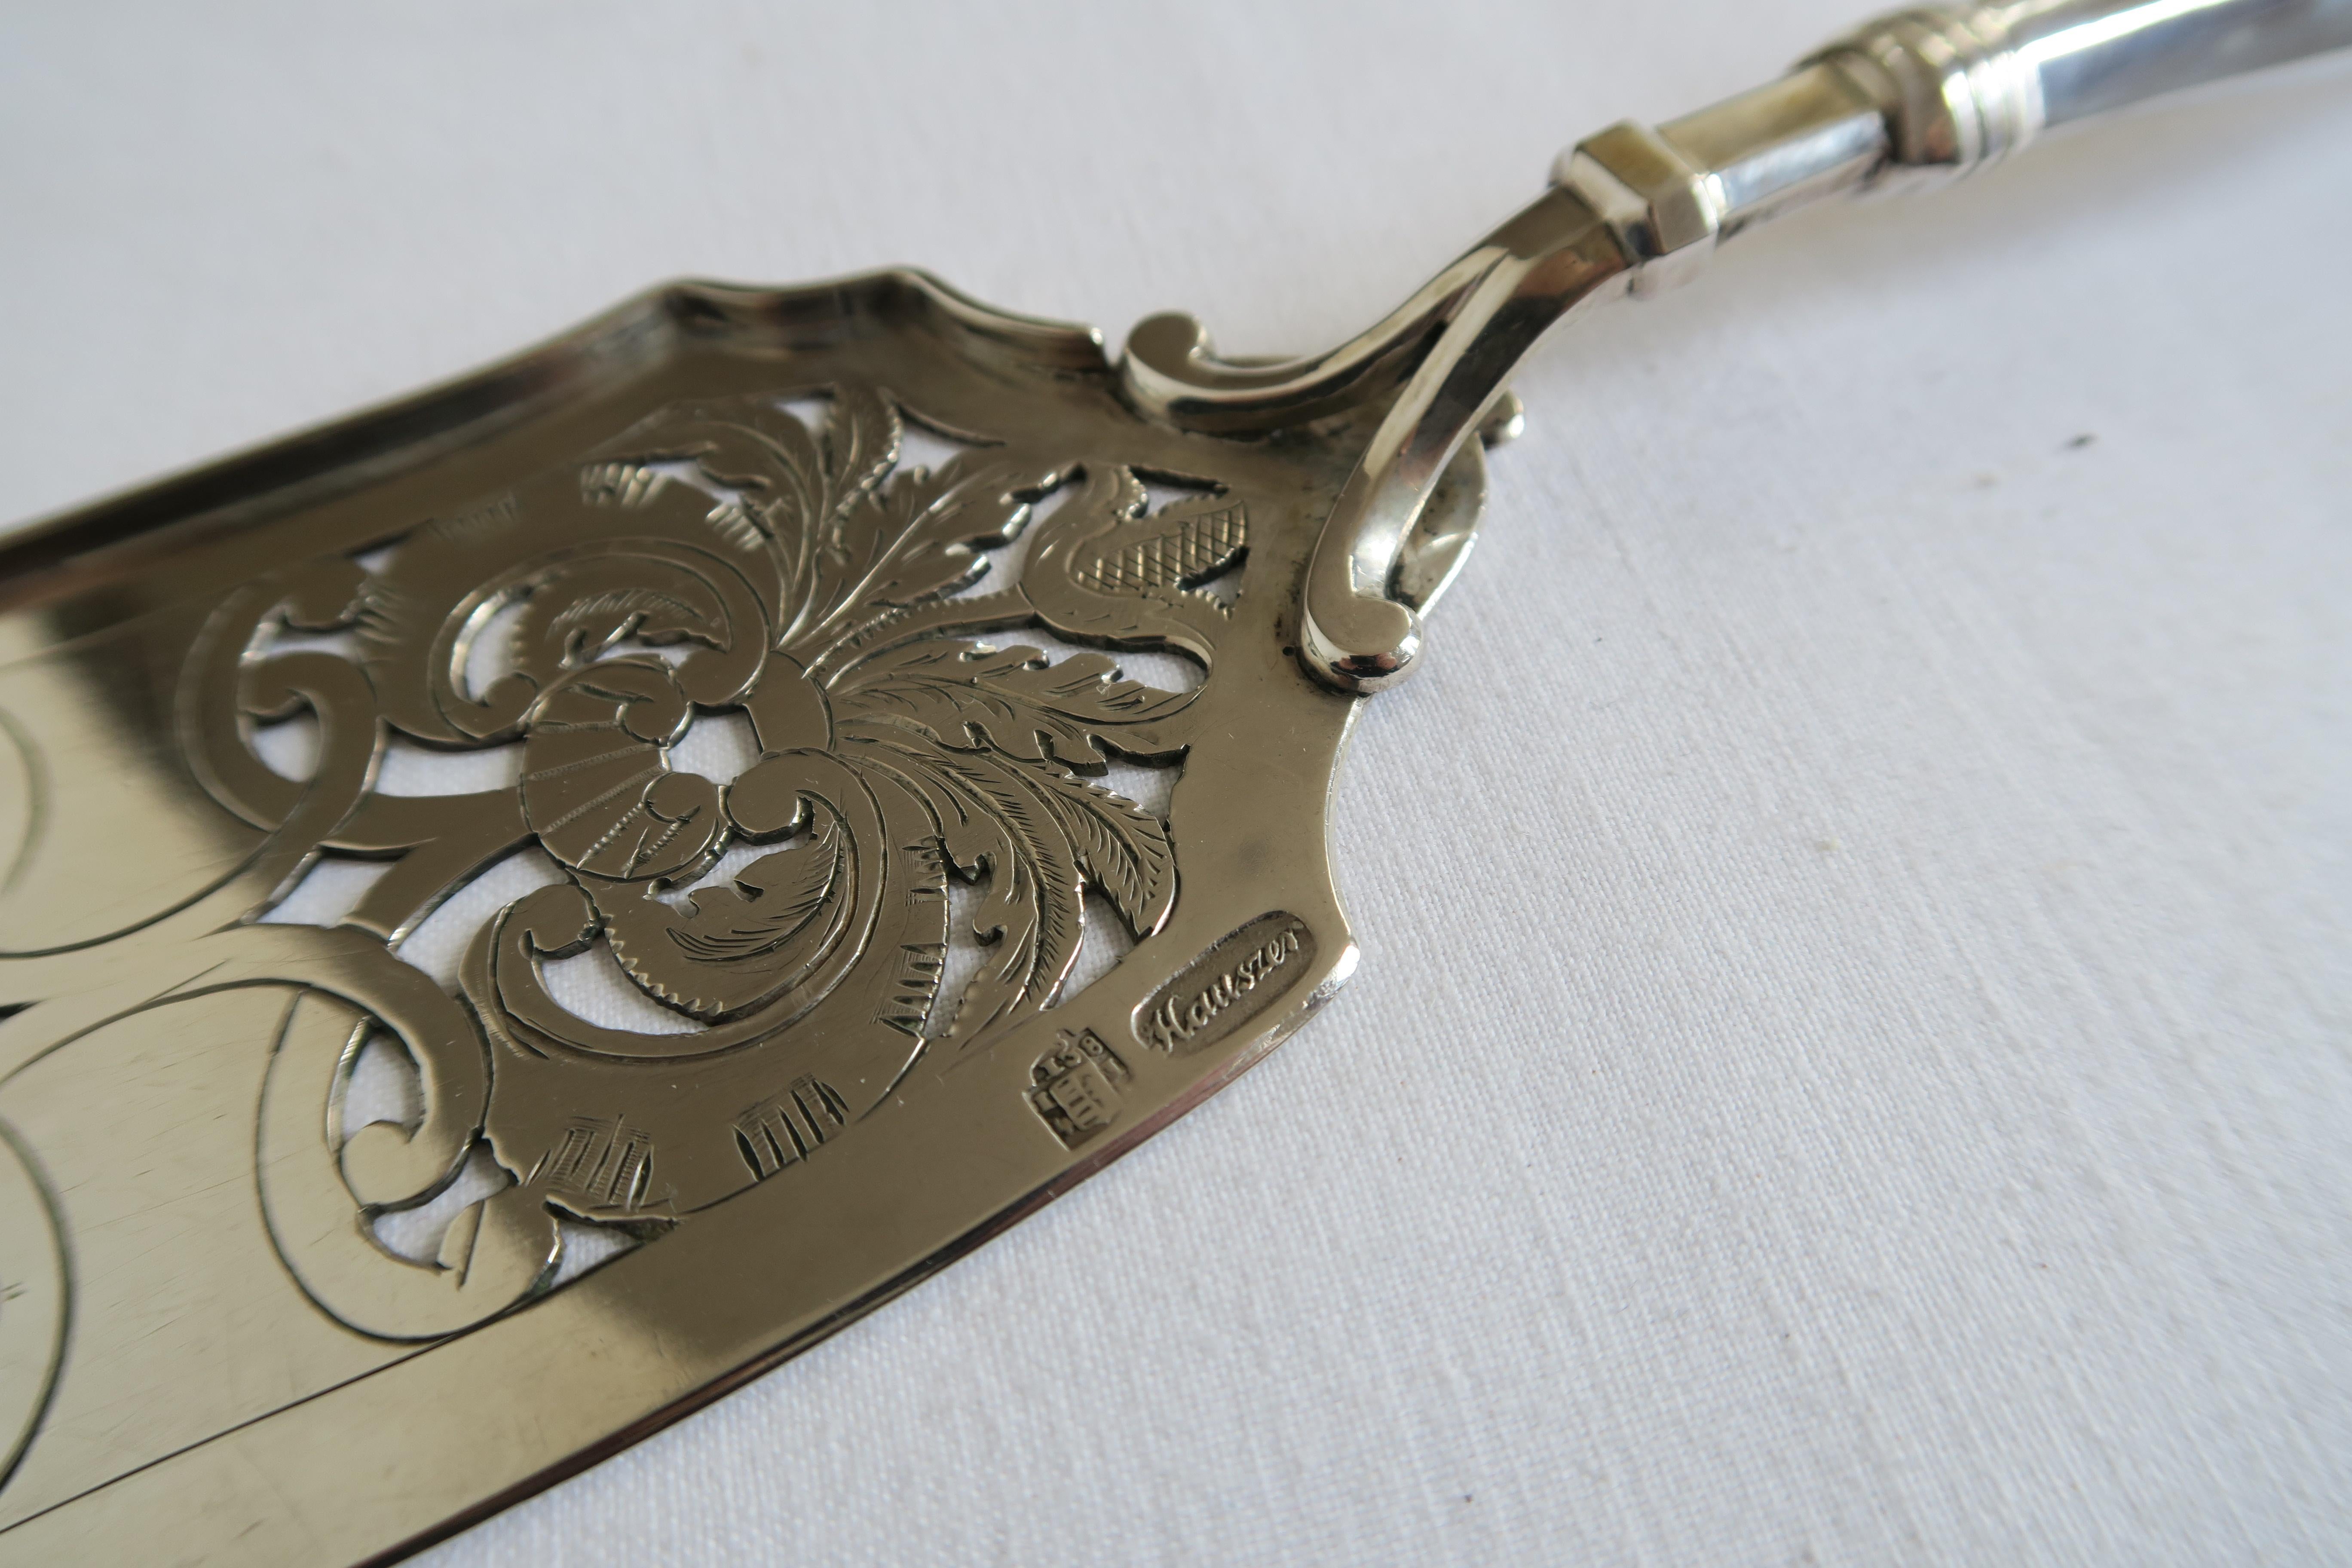 The item for sale is a beautiful, ornamental rococo cake shovel or fish server. It was made in 1841 according to the hallmark and owned by the K+K Monarchy of Austria. It was handcrafted from solid sterling silver with the most intricate ornaments